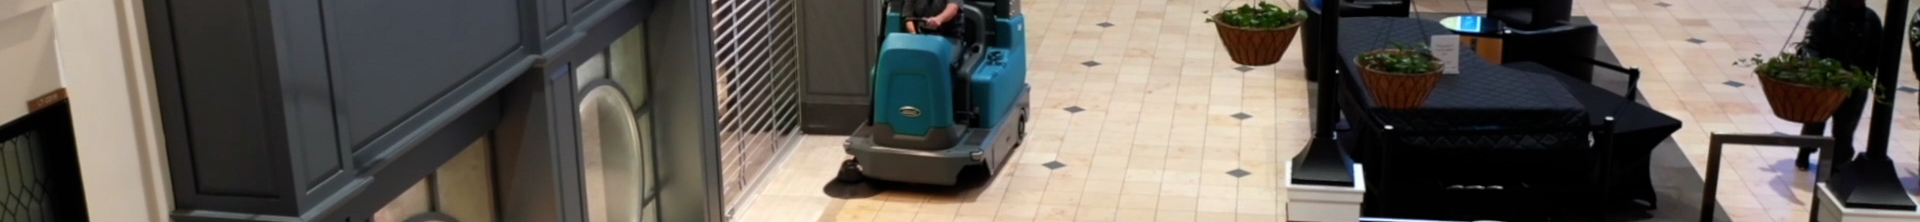 Tennant S16 Ride-On Sweeper cleaning in an airport